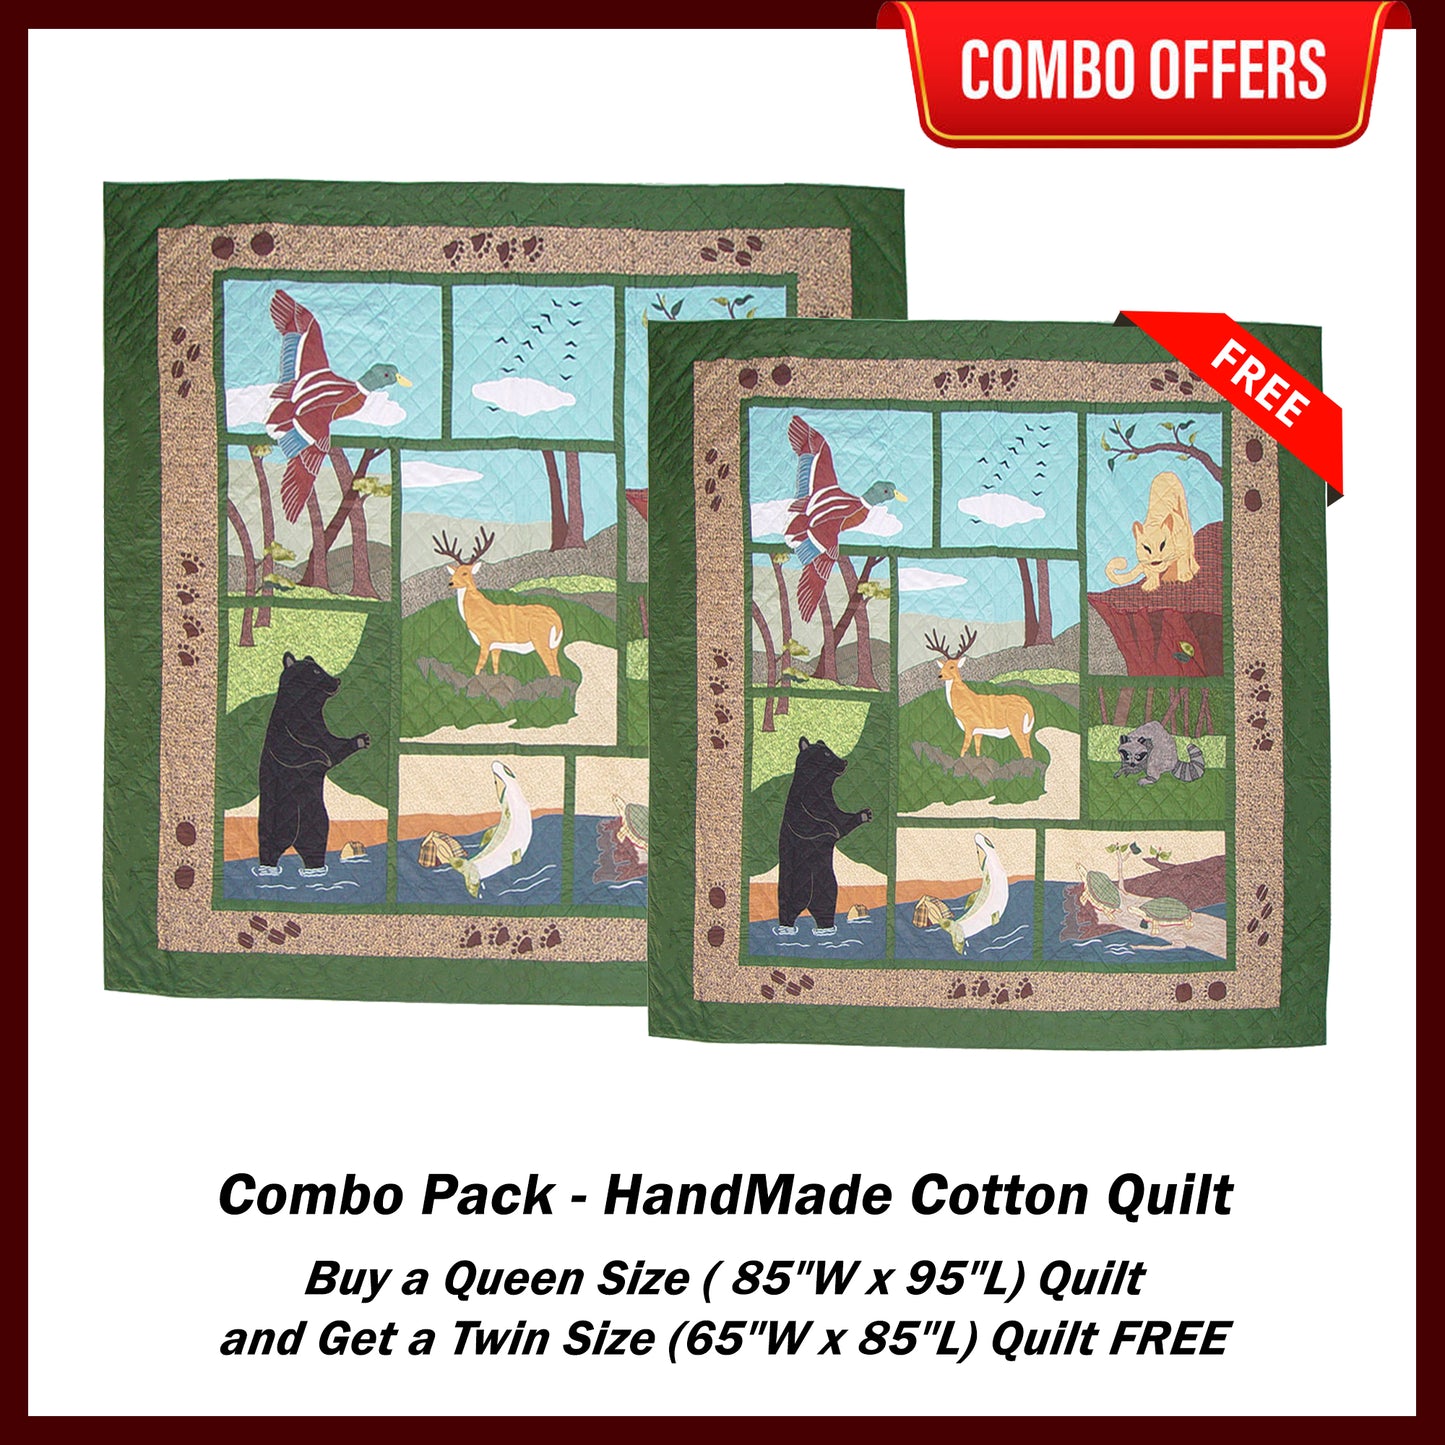 Wilderness Handmade Cotton Quilt - Buy a King Size (or) Queen Size Quilt and Get a Twin Size Quilt FREE